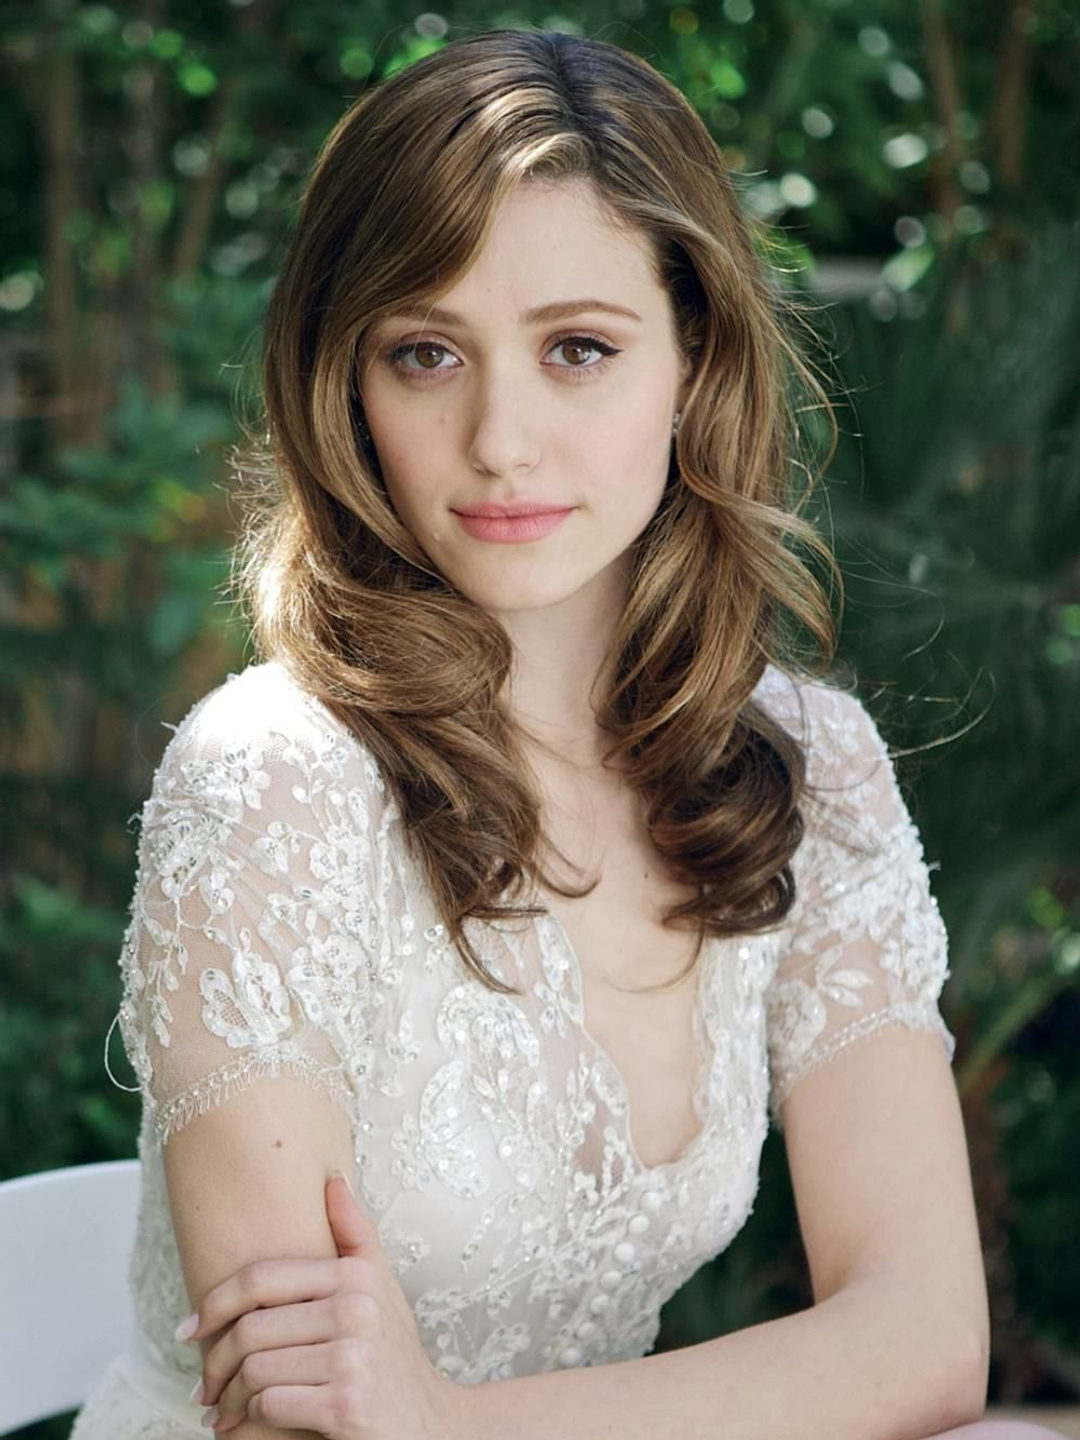 Emmy Rossum young pics